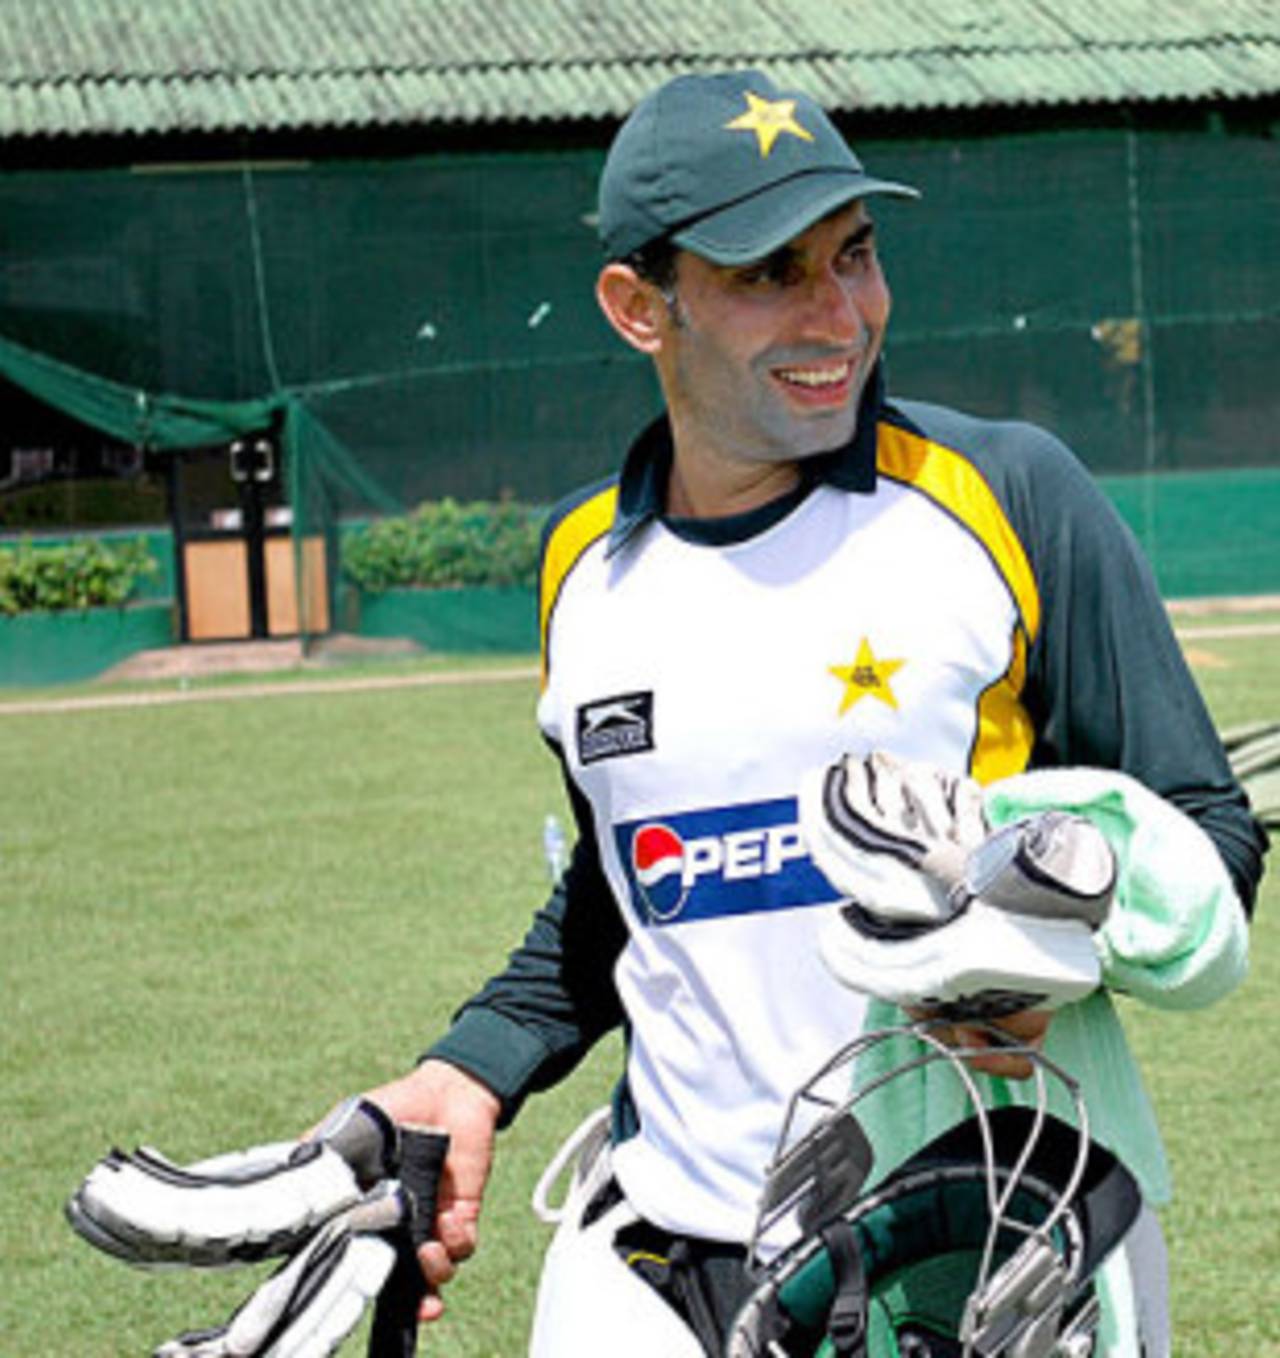 Misbah-ul-Haq knows how to get the best out of players and is a winner according to Geoff Lawson&nbsp;&nbsp;&bull;&nbsp;&nbsp;ESPNcricinfo Ltd